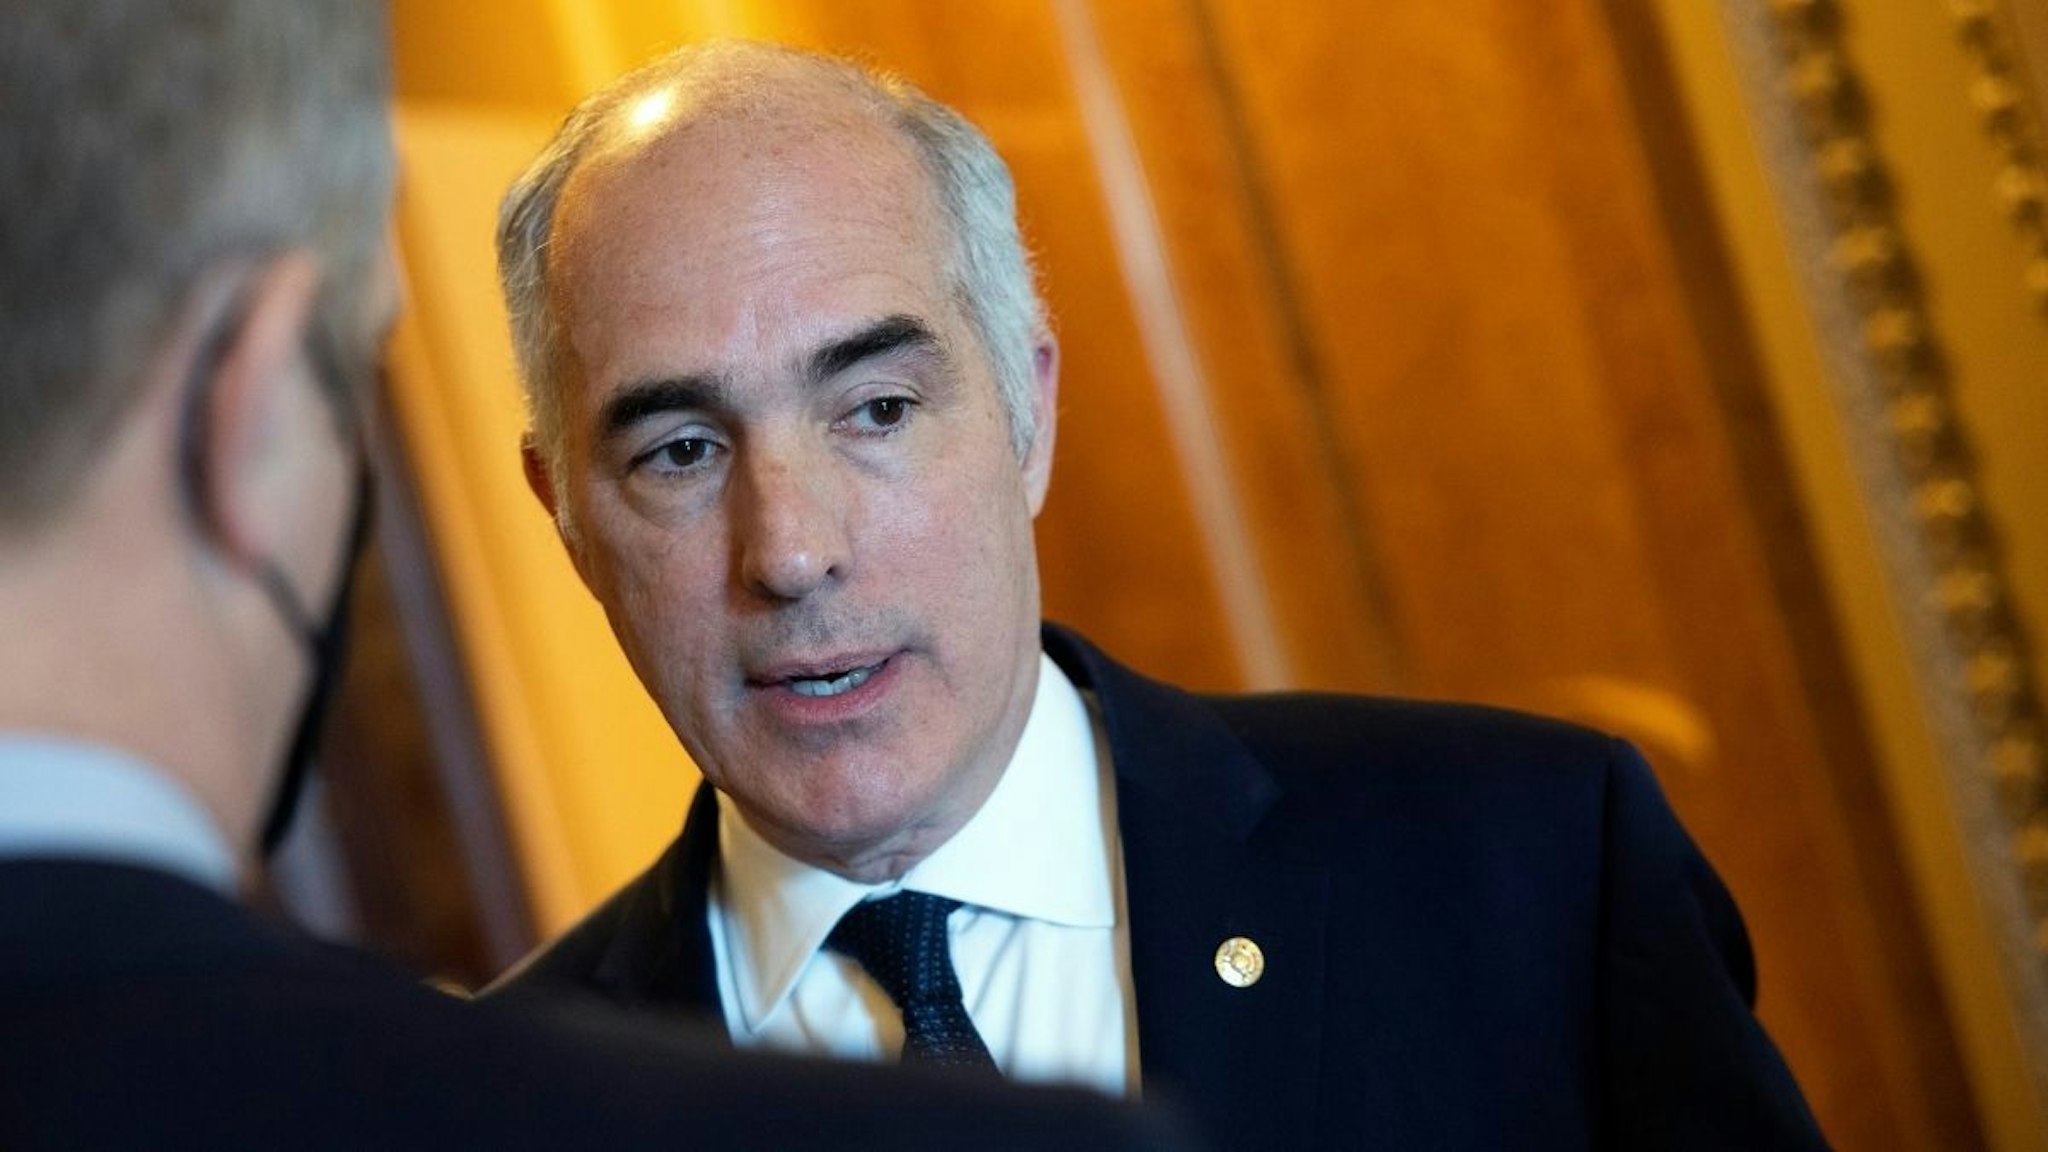 U.S. Sen. Bob Casey (D-PA) talks to reporters prior to a Democratic policy luncheon at the U.S. Capitol on May 10, 2022 in Washington, DC.